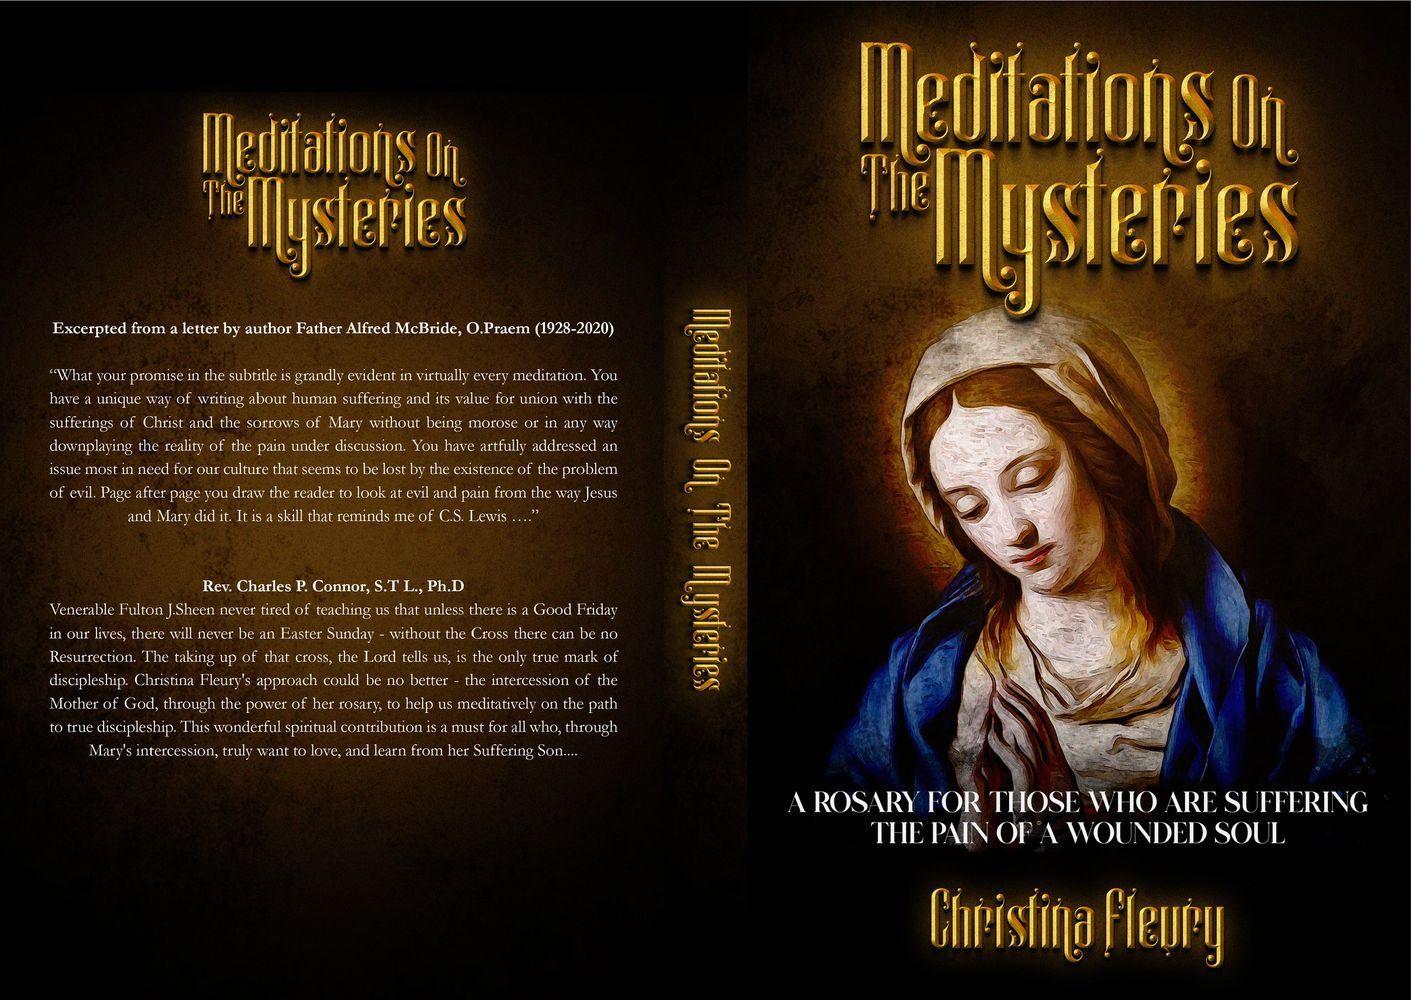 Meditations On the Mysteries: A Rosary for Those Who Are Suffering the Pain of A Wounded Soul